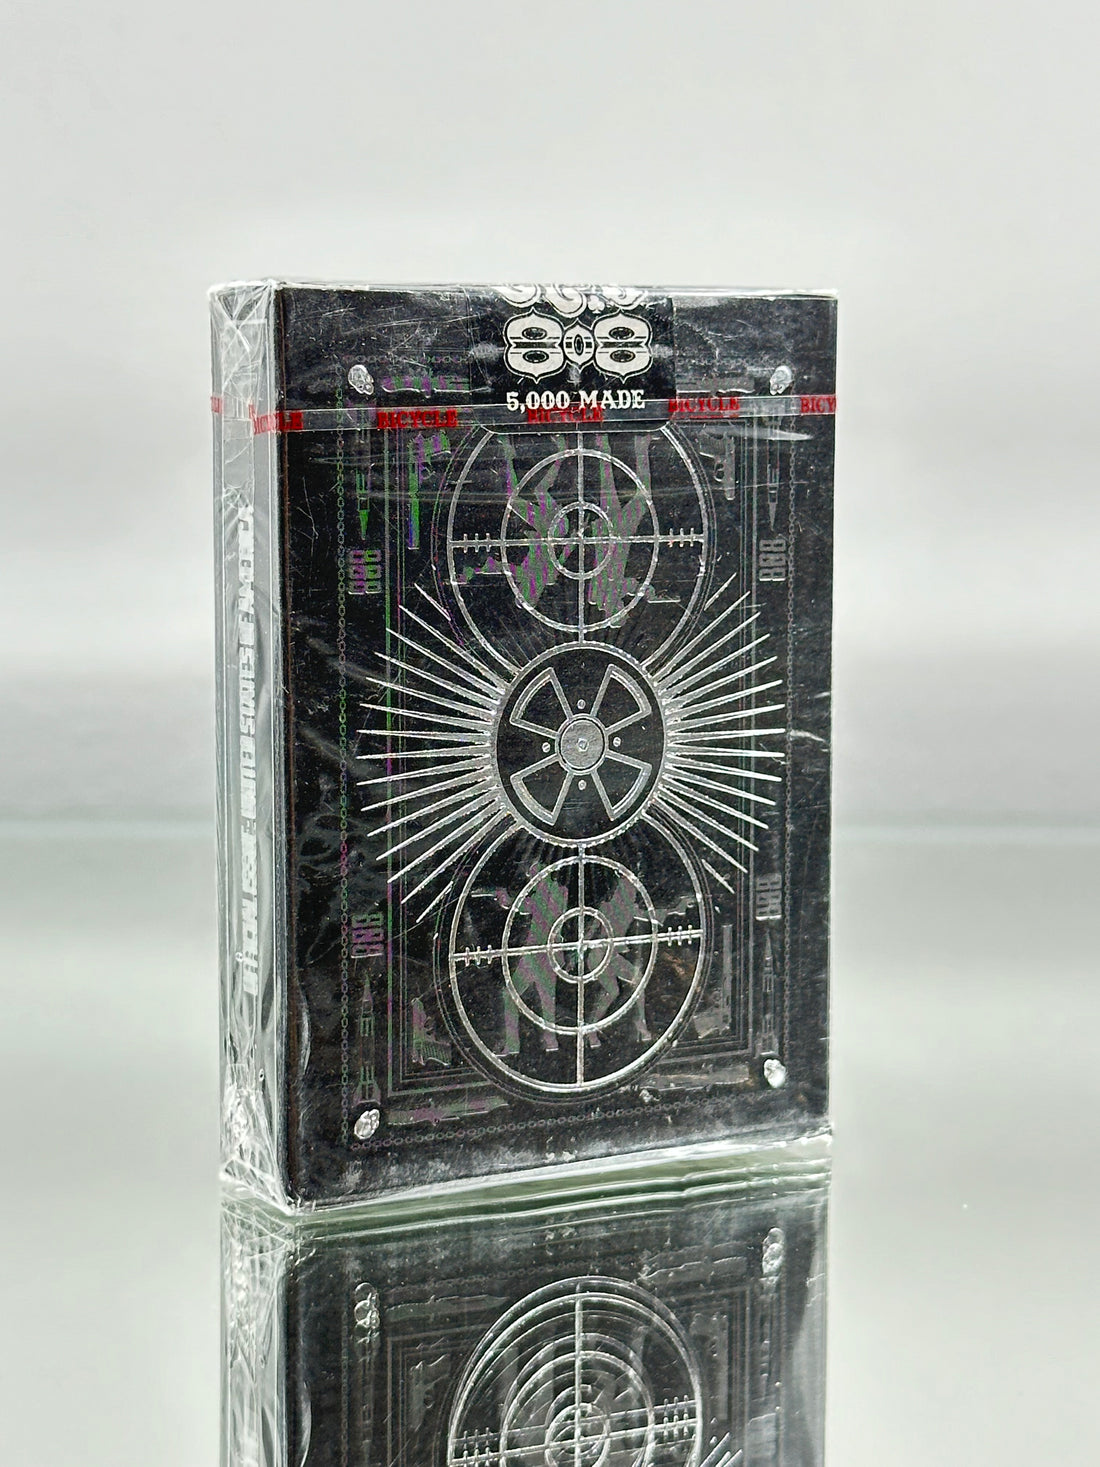 Bicycle Espionage Foil Limited Edition Playing Cards (808 Club)